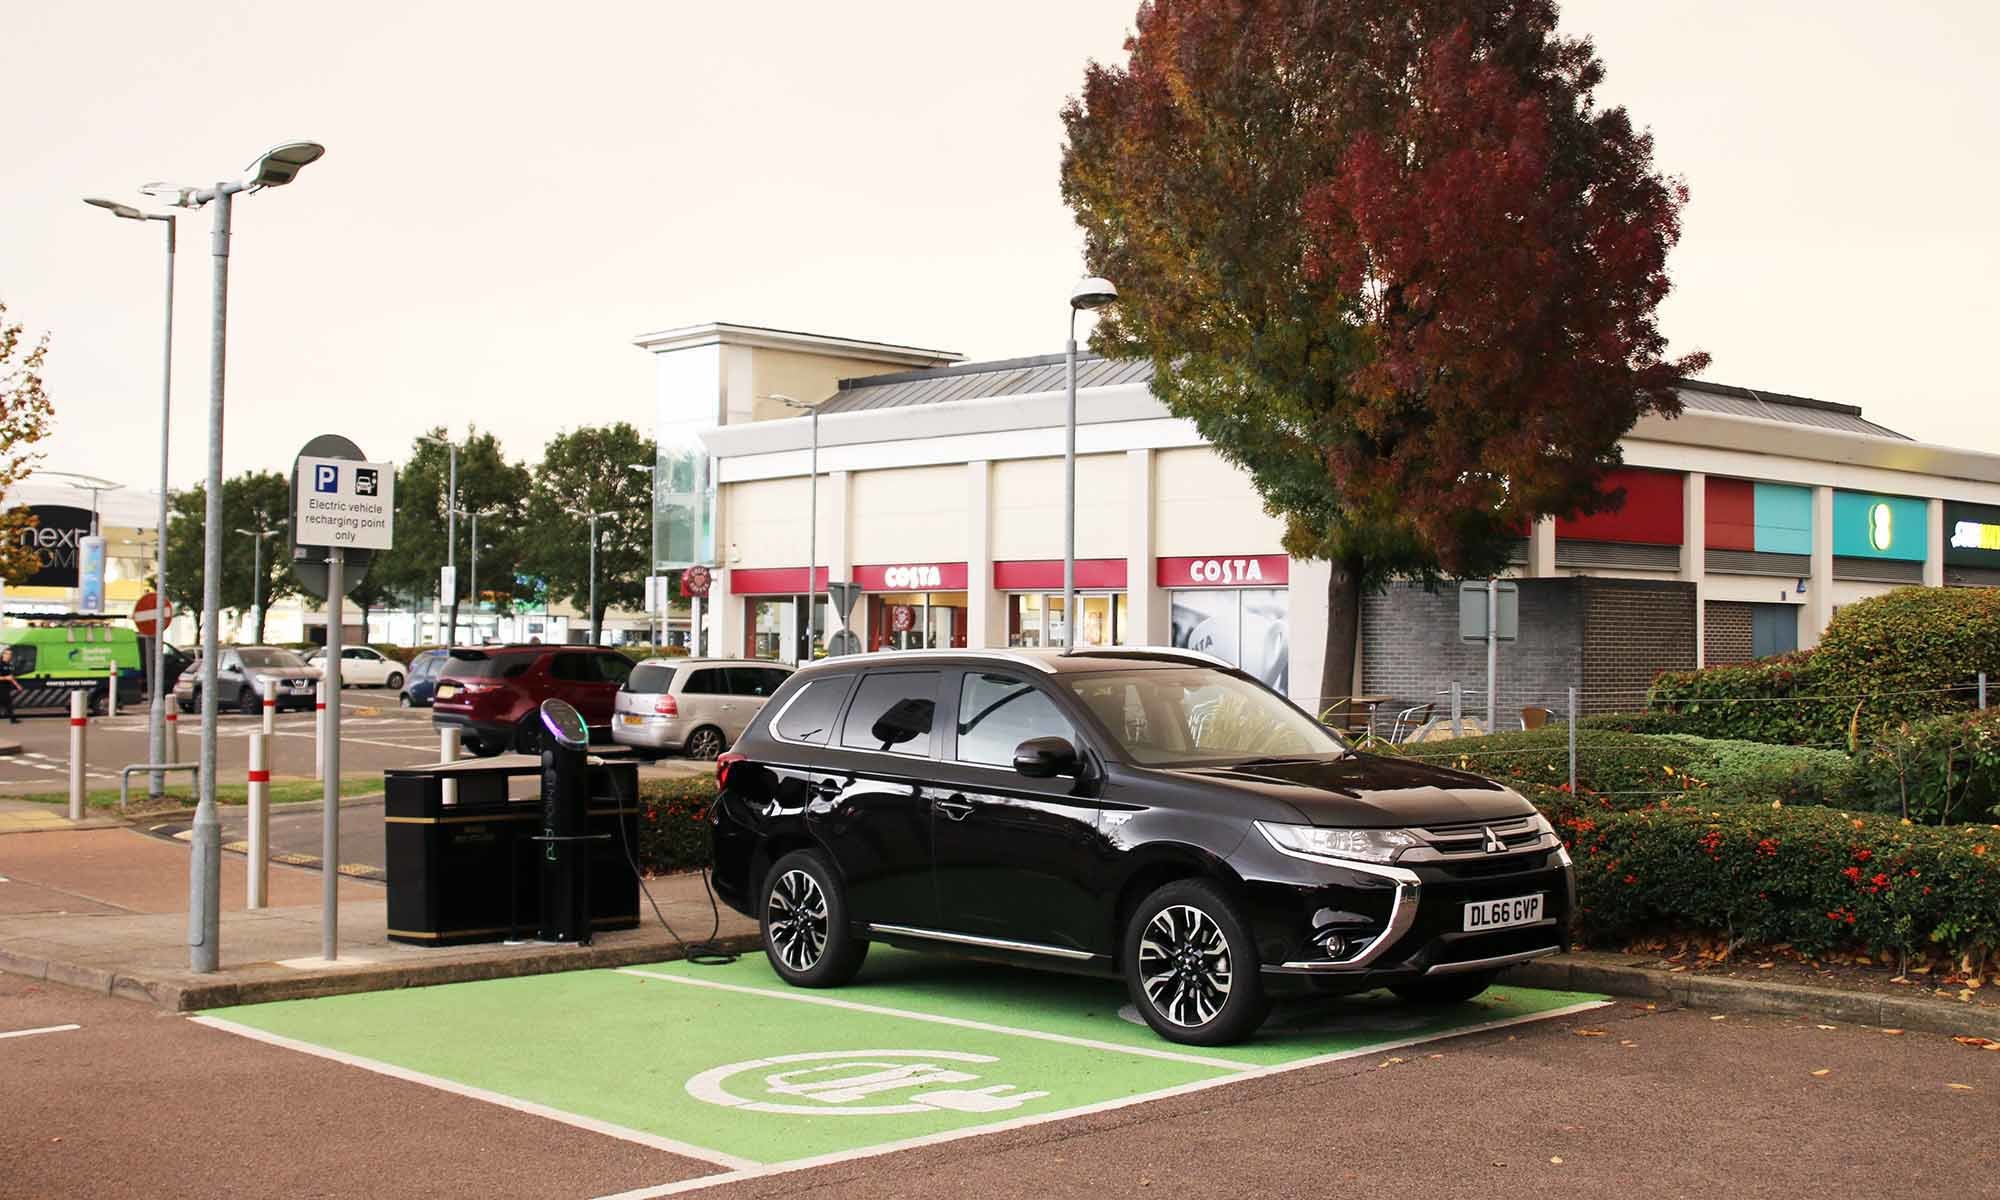 A black SUV parked in a green EV charging bay at the Savill's car park, and plugged into a Pod Point twin charger